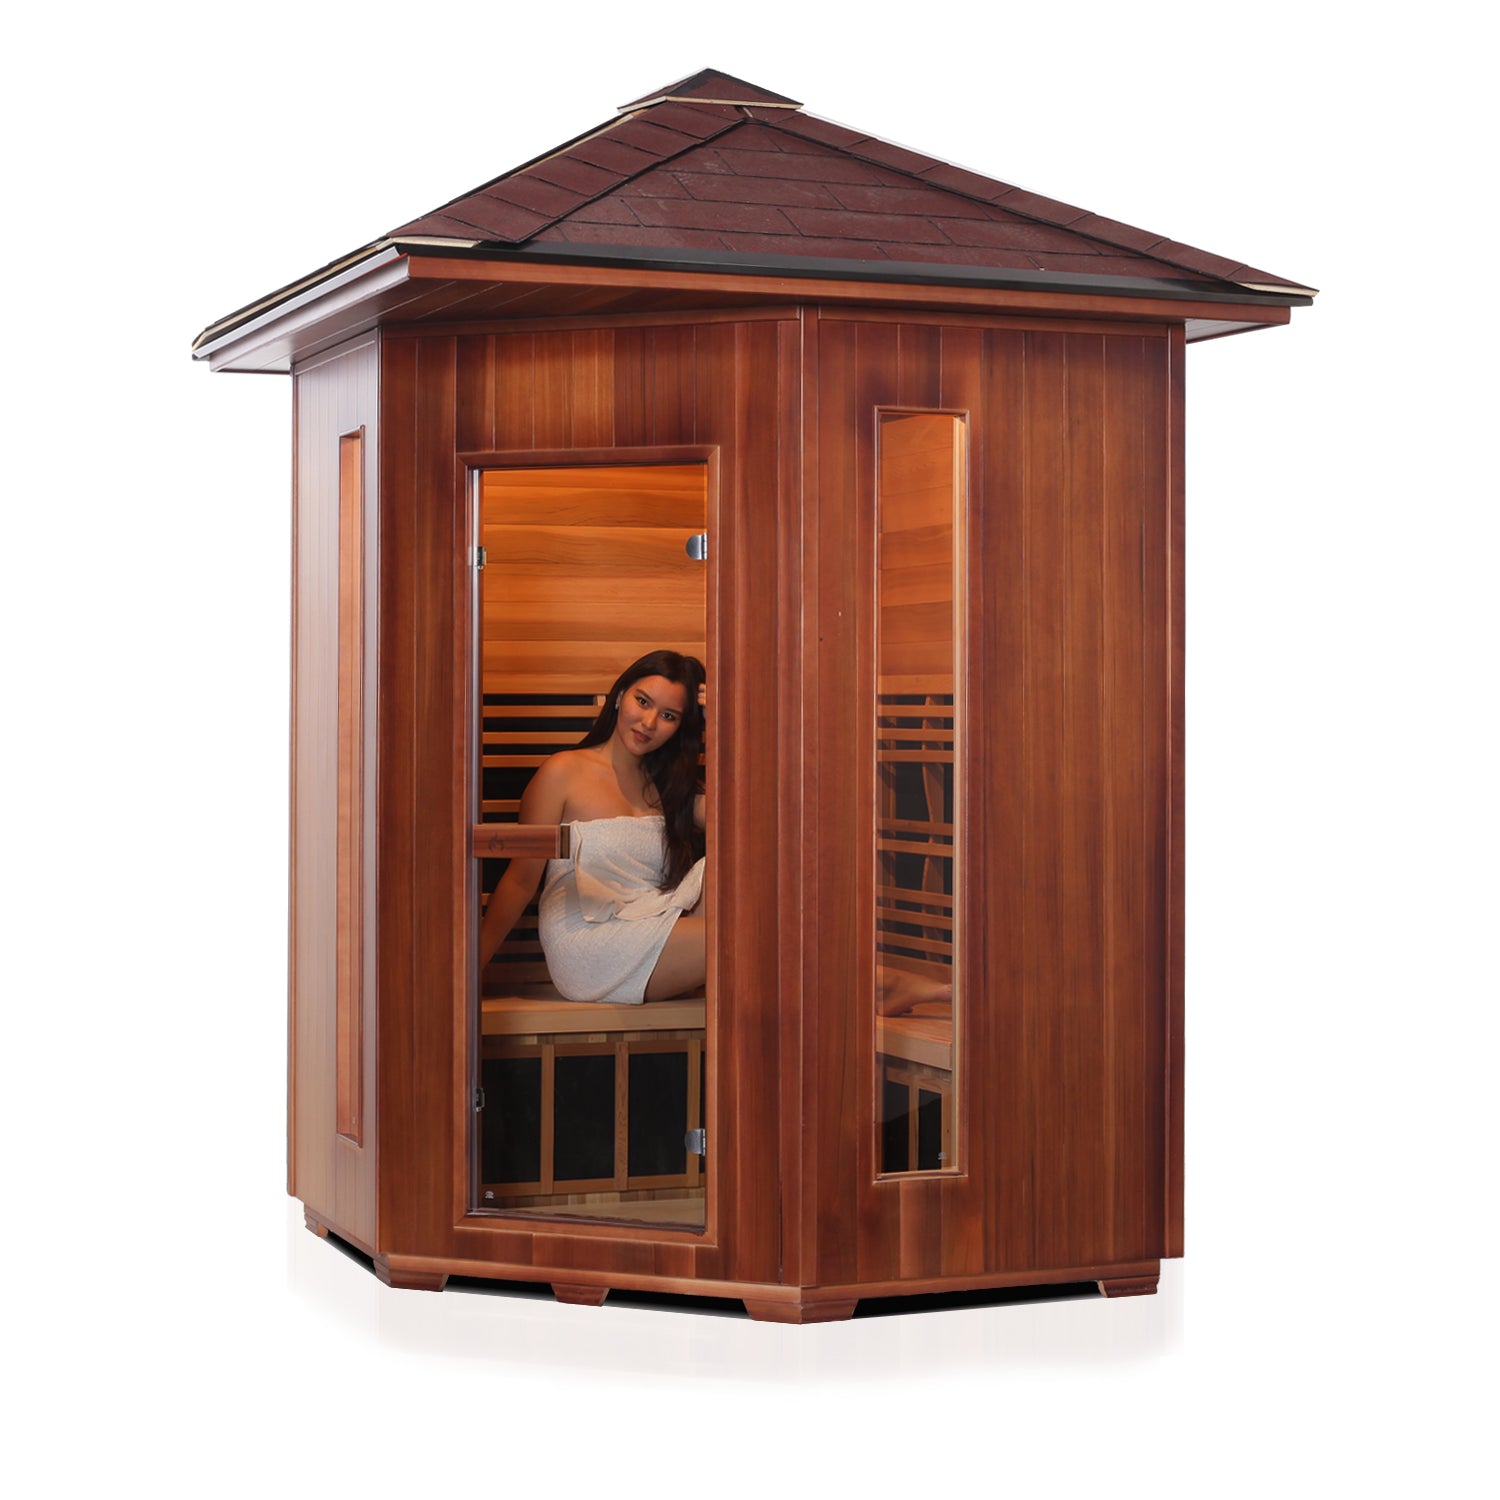 Rustic Infrared Sauna Canadian red cedar inside and out with peaked roof and glass door and windows